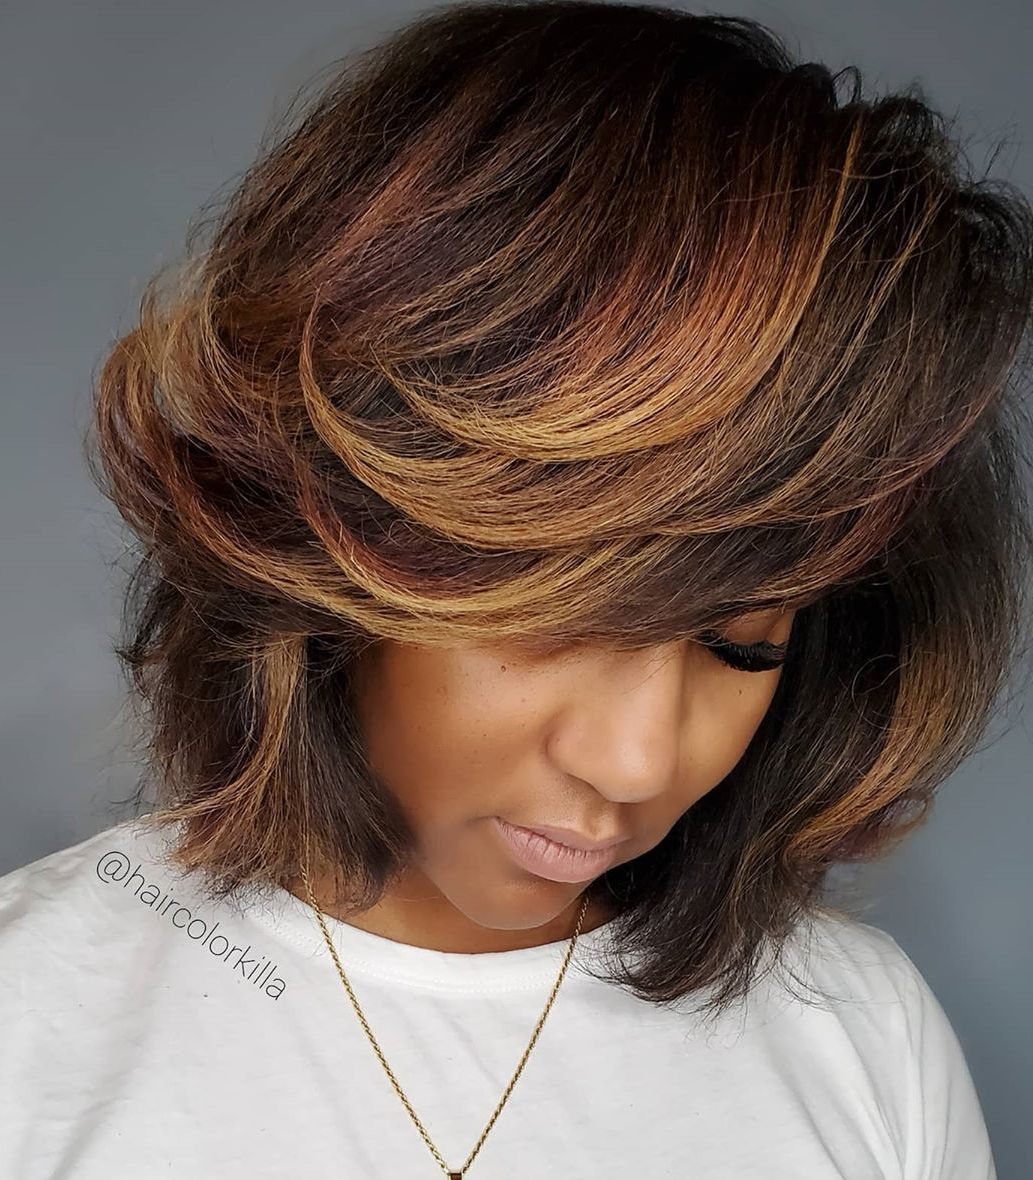 Hair Colors For Dark Skin To Look Even More Gorgeous Hair Adviser